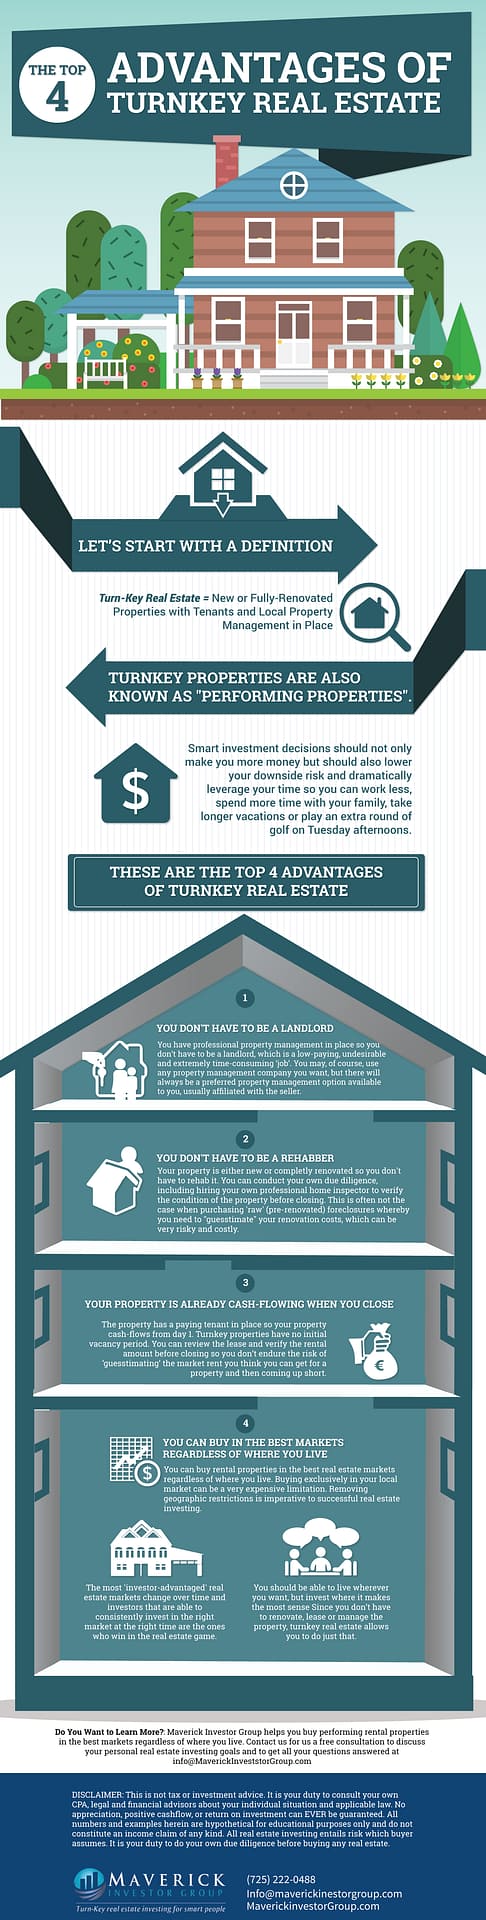 Infographic of Turnkey Real Estate